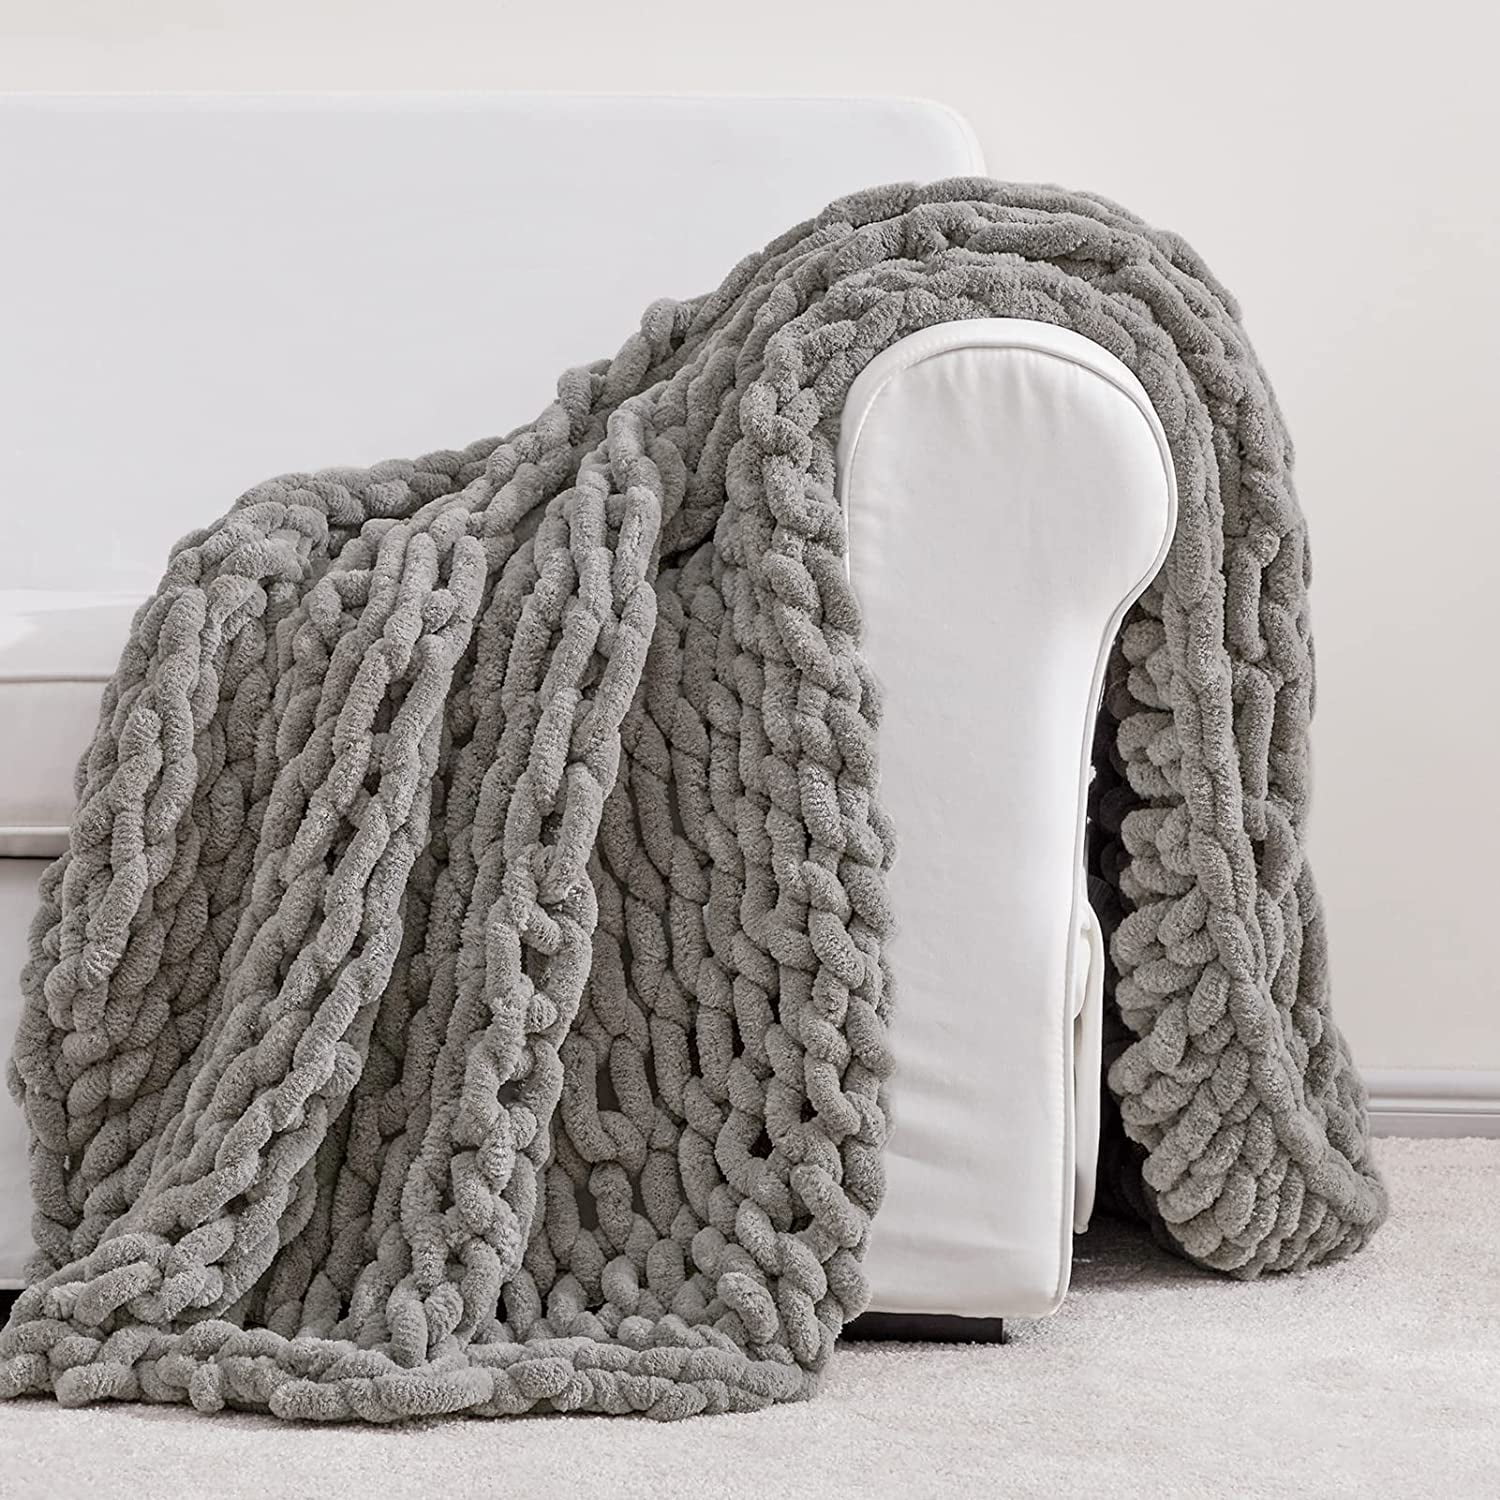 Abound Chunky Knit Blankets - 50x60, 5 lbs - Chenille Yarn Knitted  Crochet Throw Blanket - Cozy Braided Cable Boho Farmhouse Home Decor for  Couch